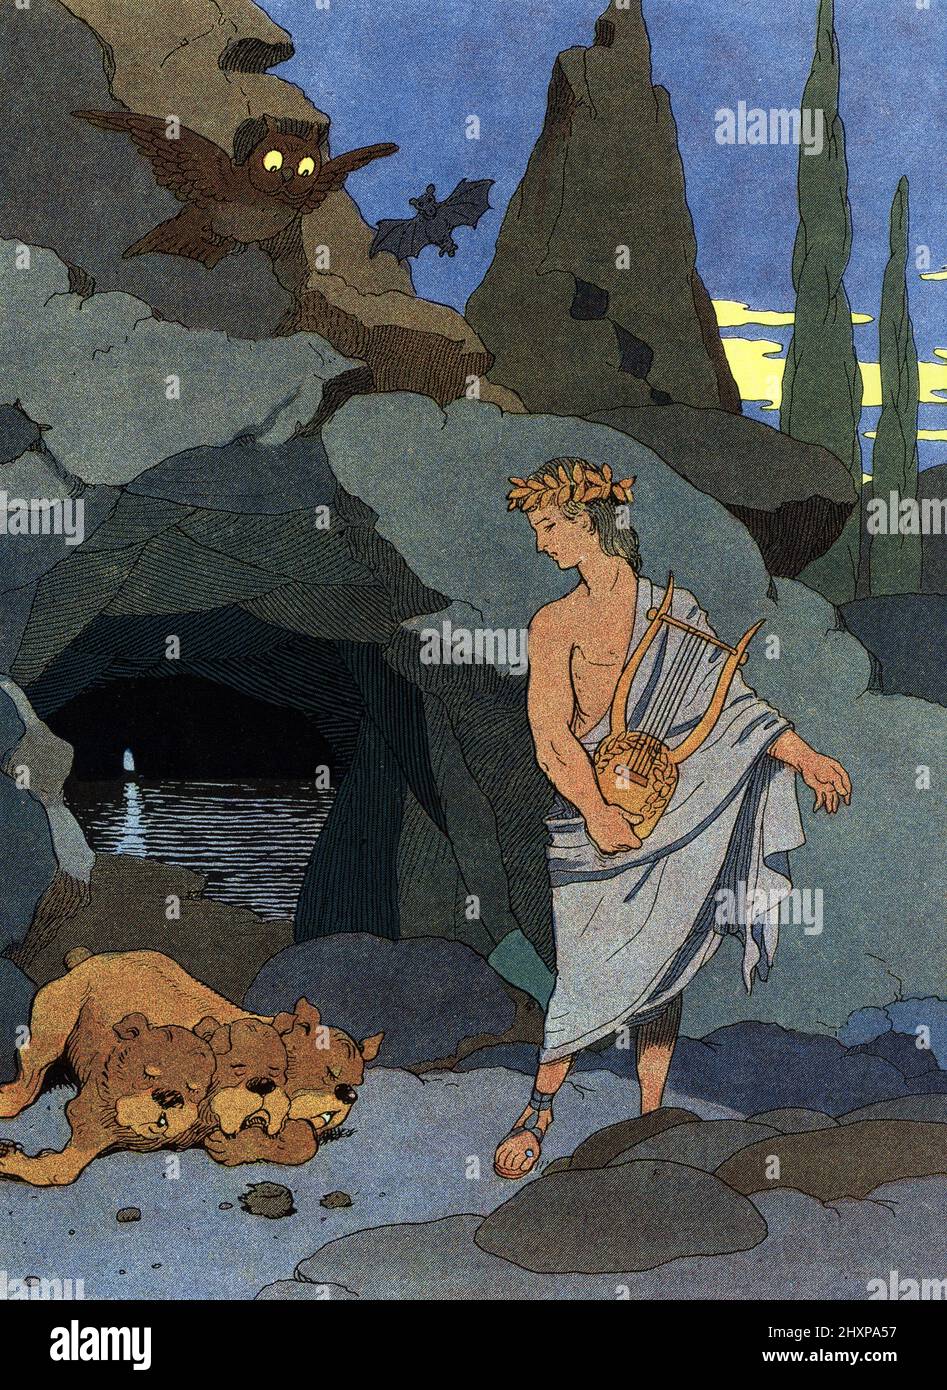 'Le poete Orphee et sa lyre endort Cerbere le chien a trois tetes' ( legendary musician and prophet in ancient Greek religion Orpheus playing the lyre to the multi-headed dog Cerberus who fall asleep) Illustration de Benjamin Rabier (mort en 1939) pour 'les animaux mythologiques' 1926 Collection privee Stock Photo